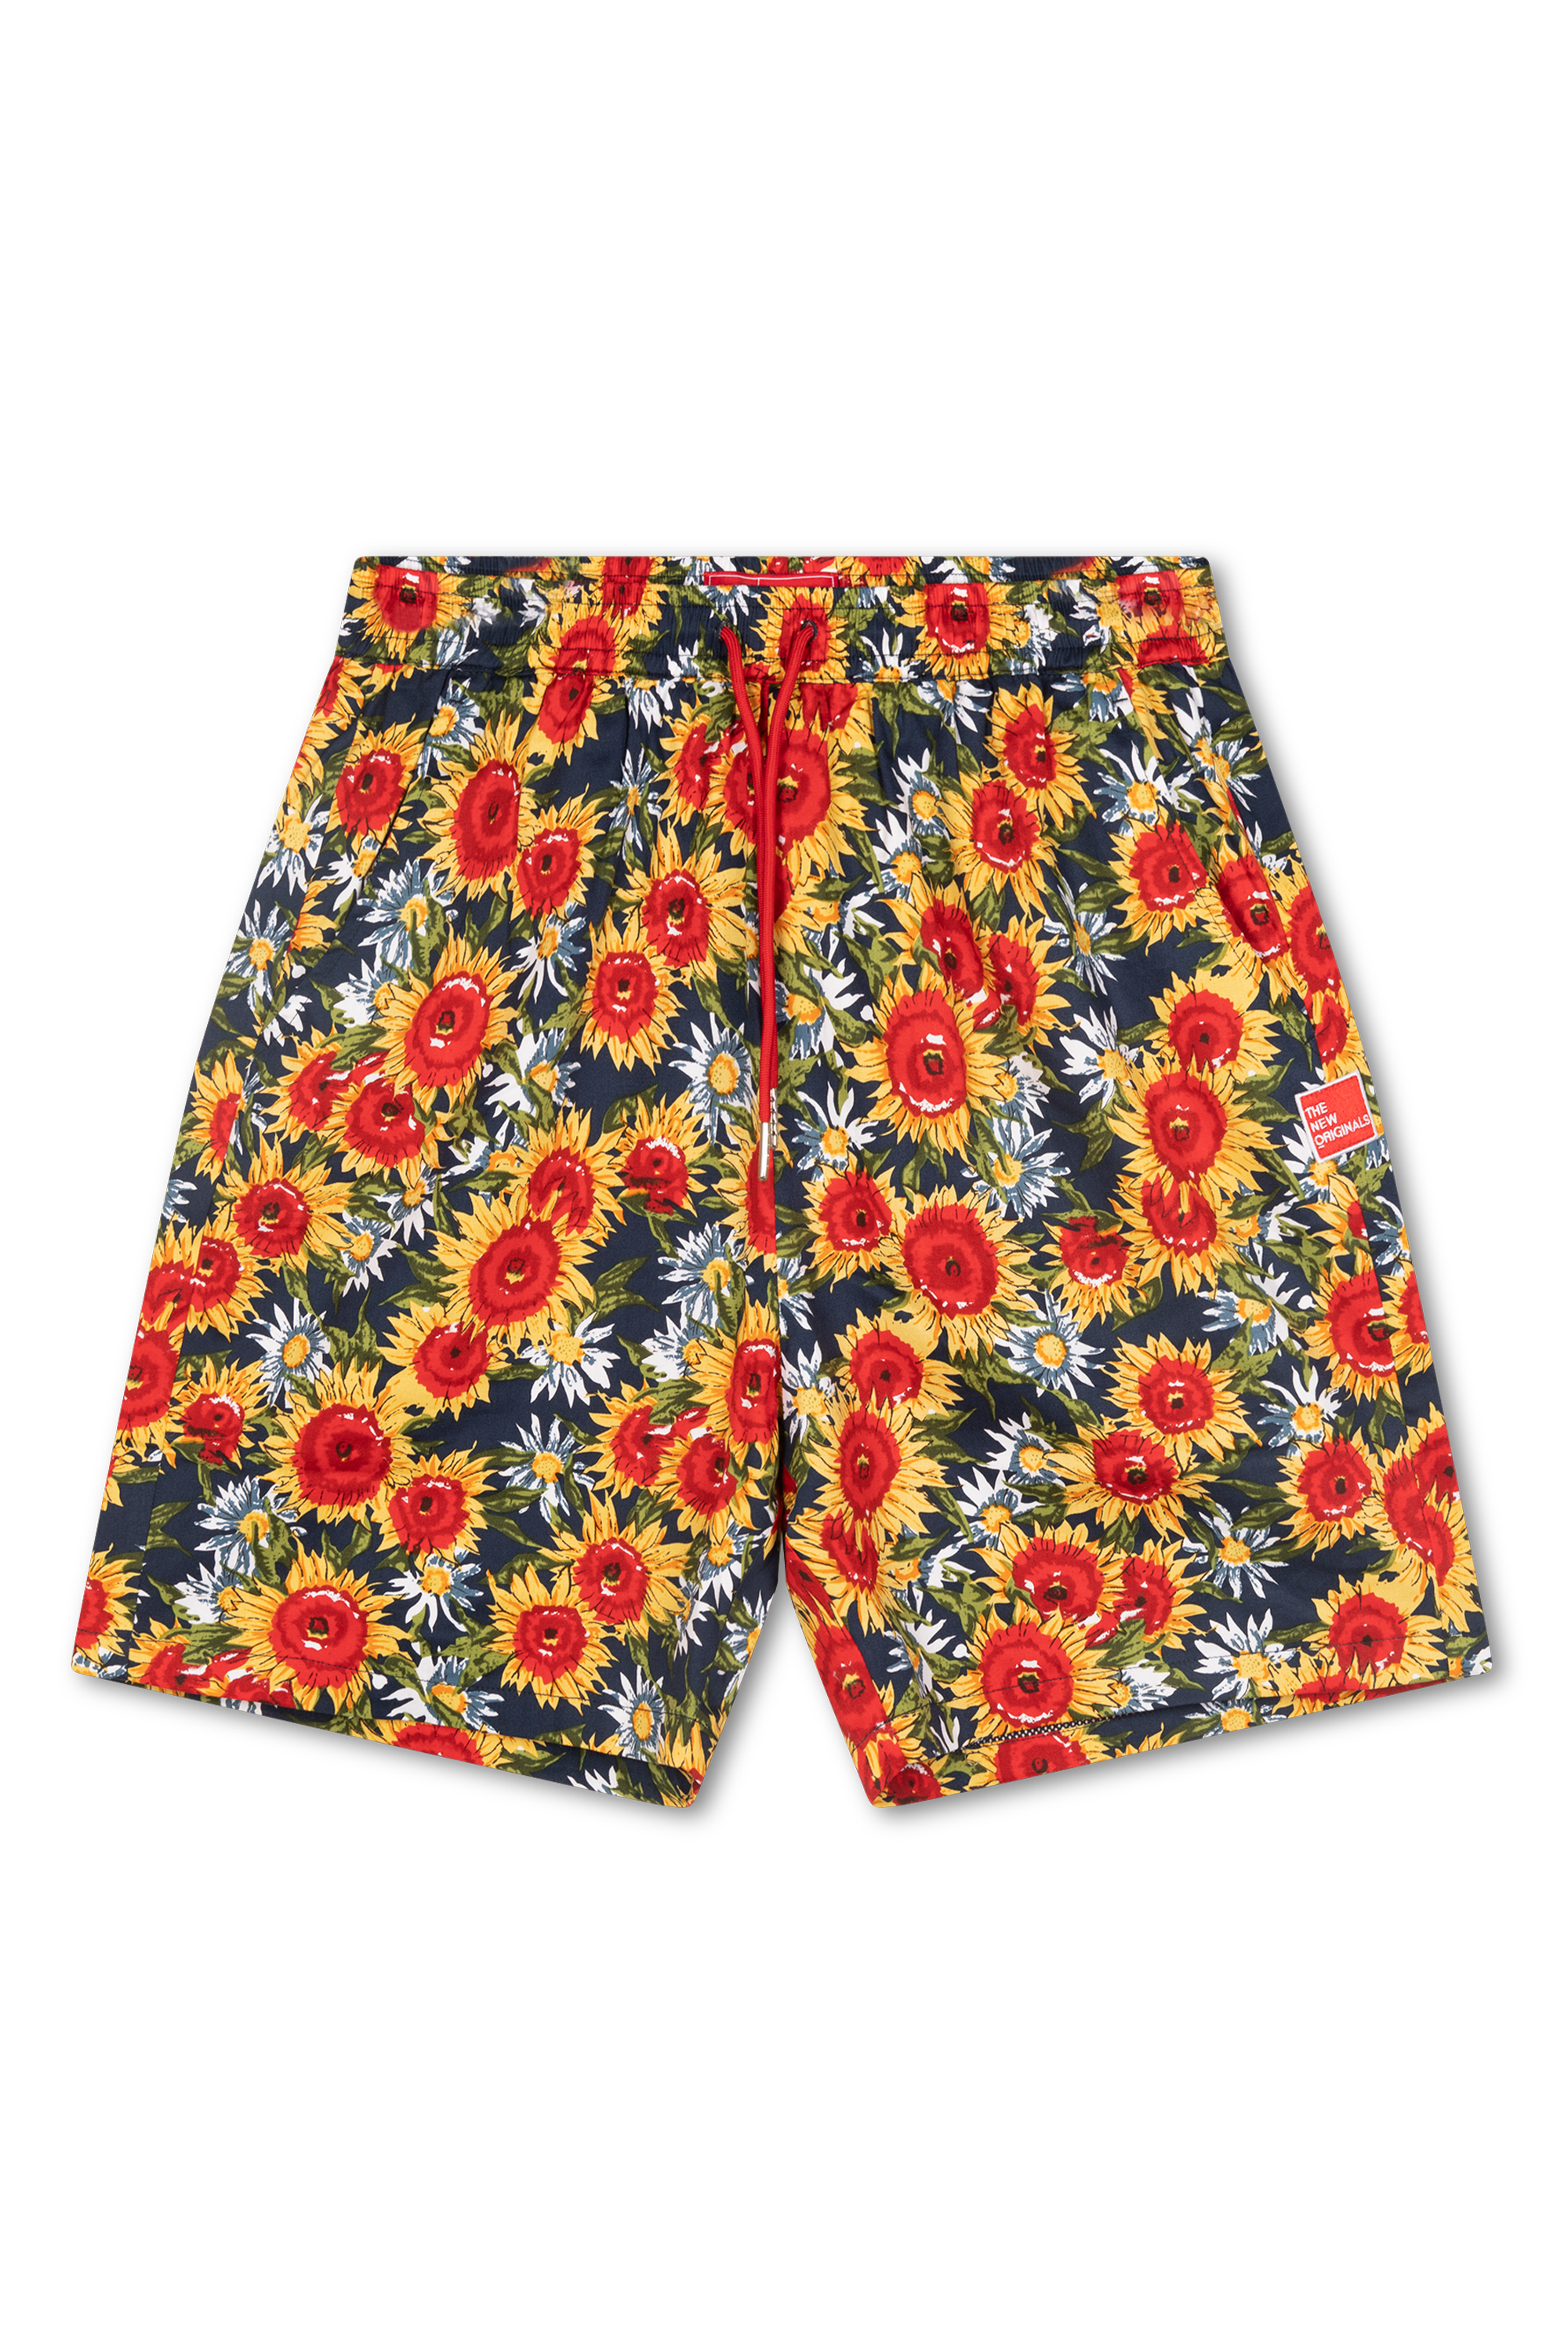 products-floralshortsnavy-01-png